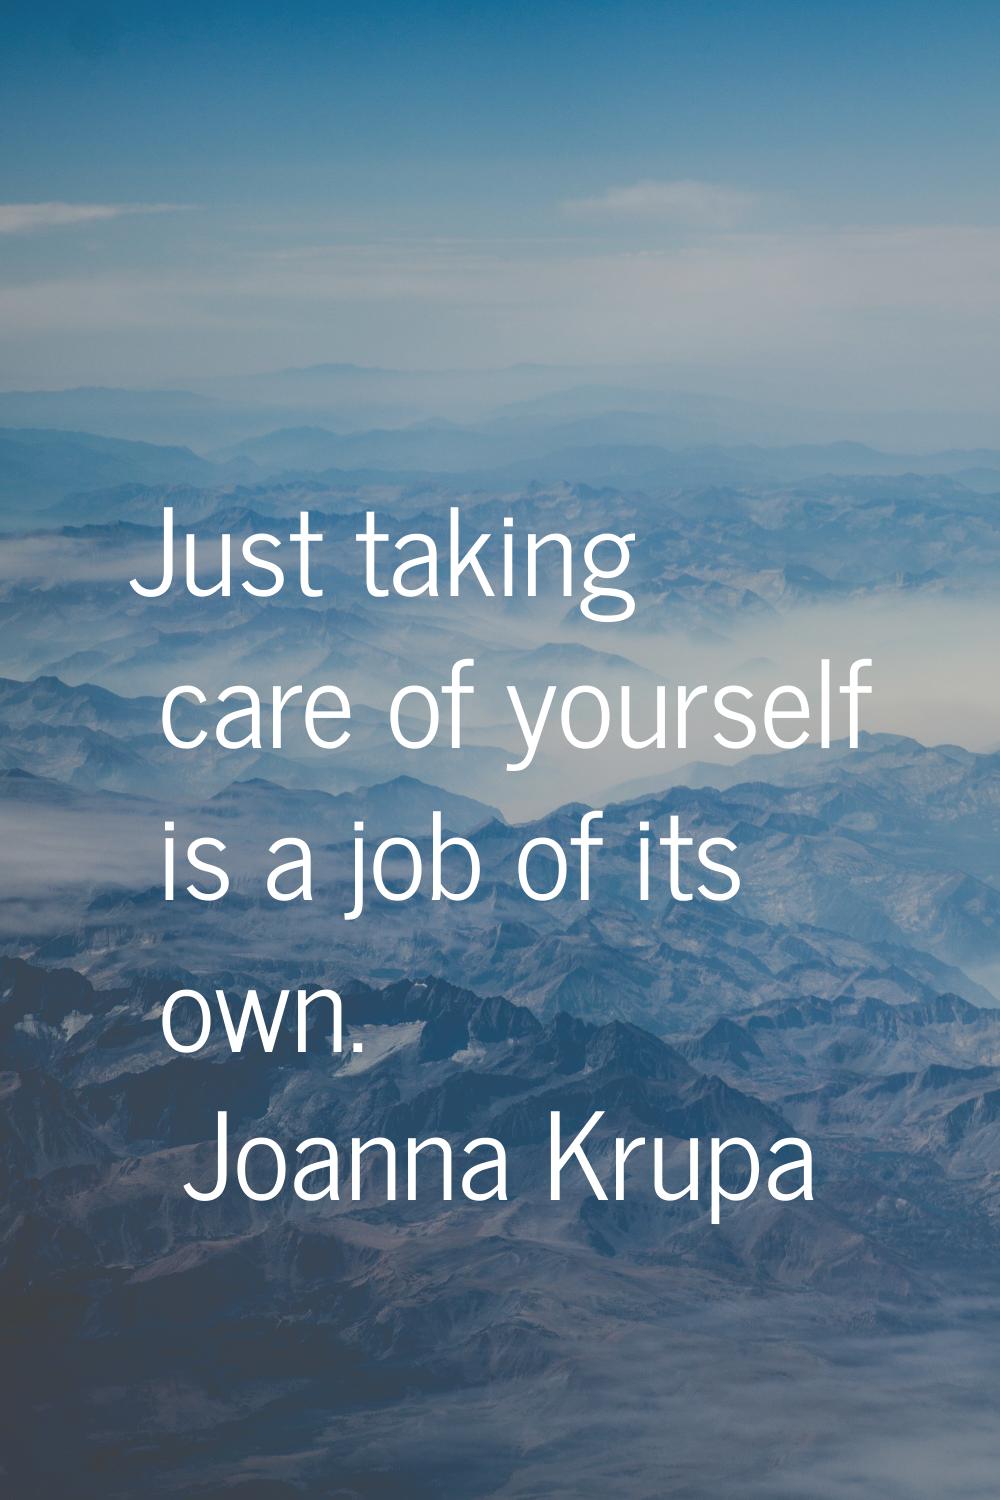 Just taking care of yourself is a job of its own.